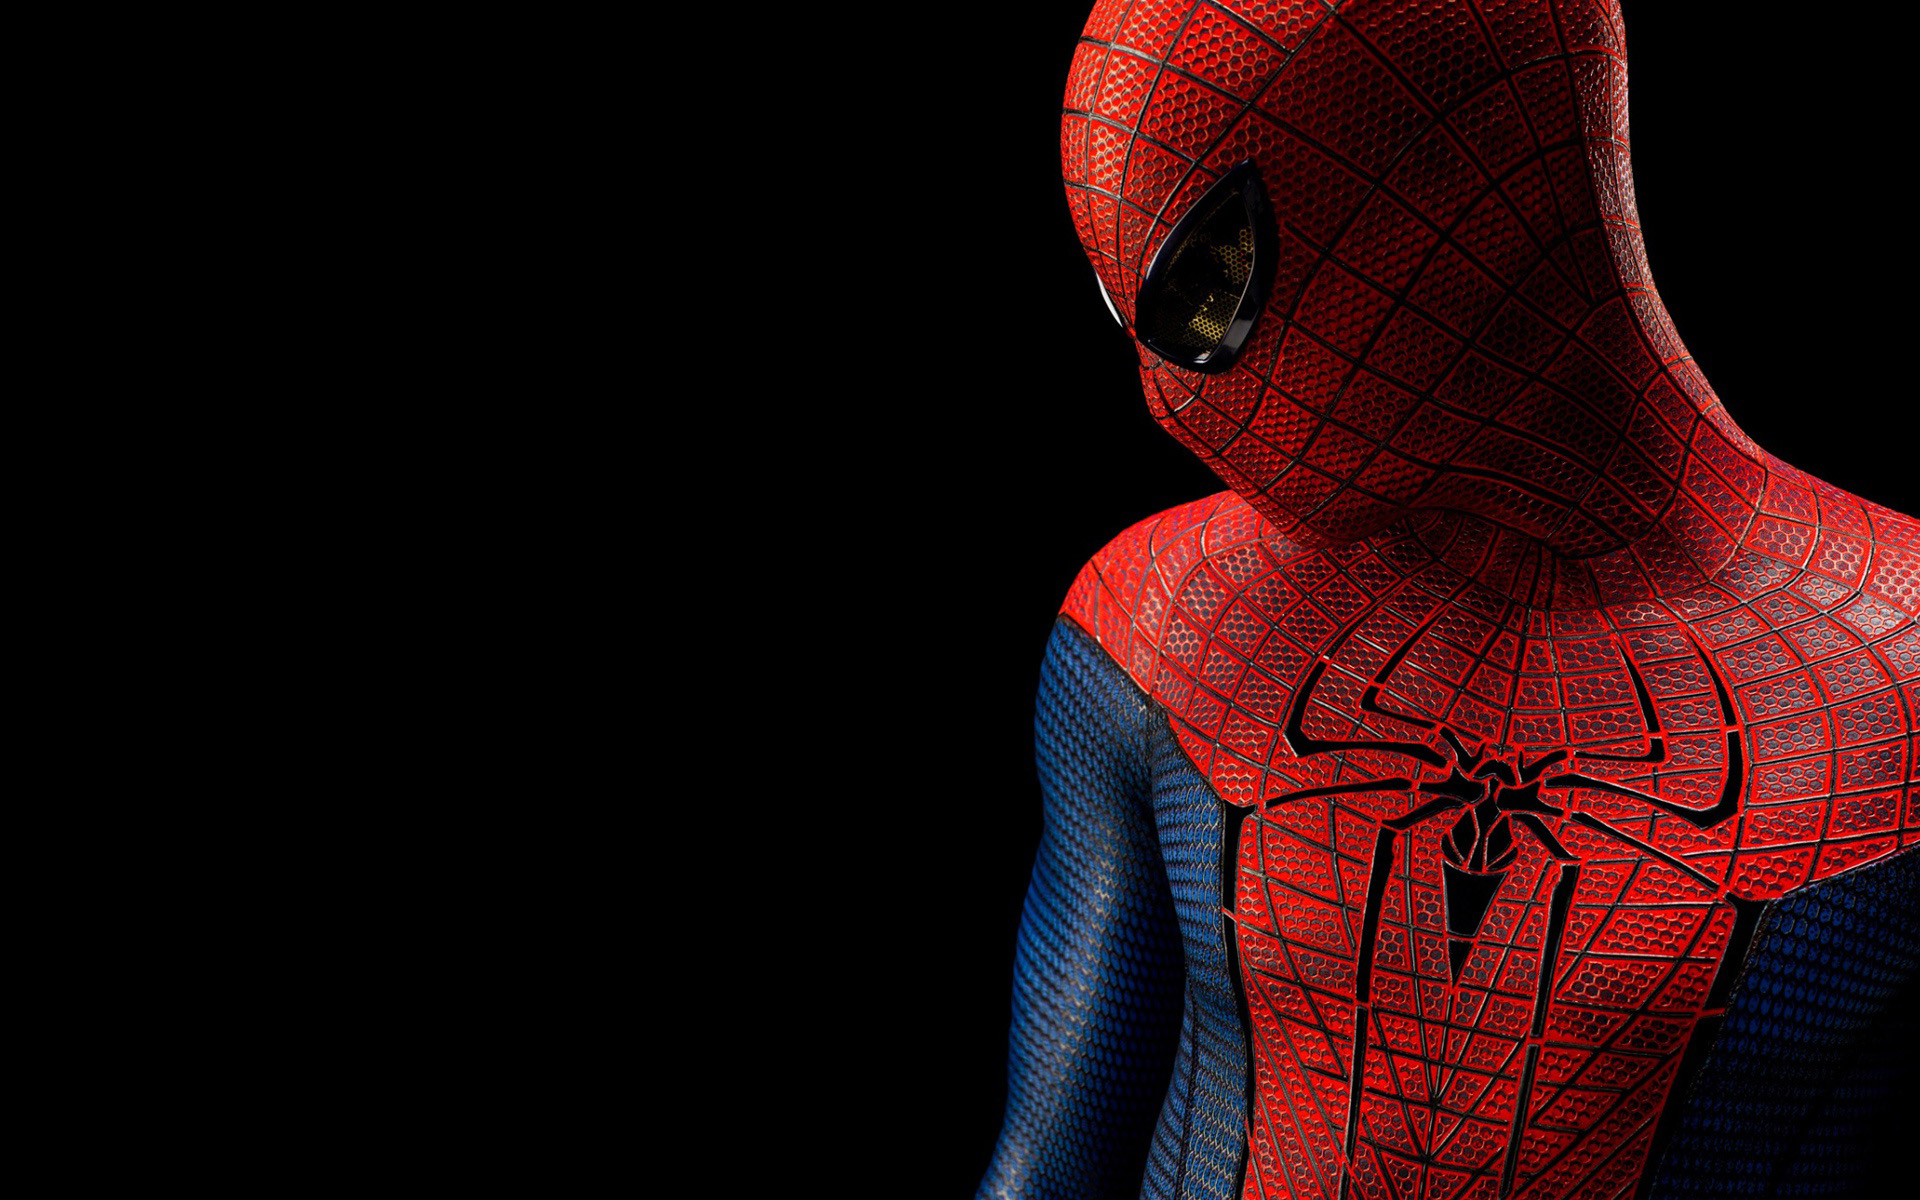  desktop galaxy backgrounds covers spiderman spider man